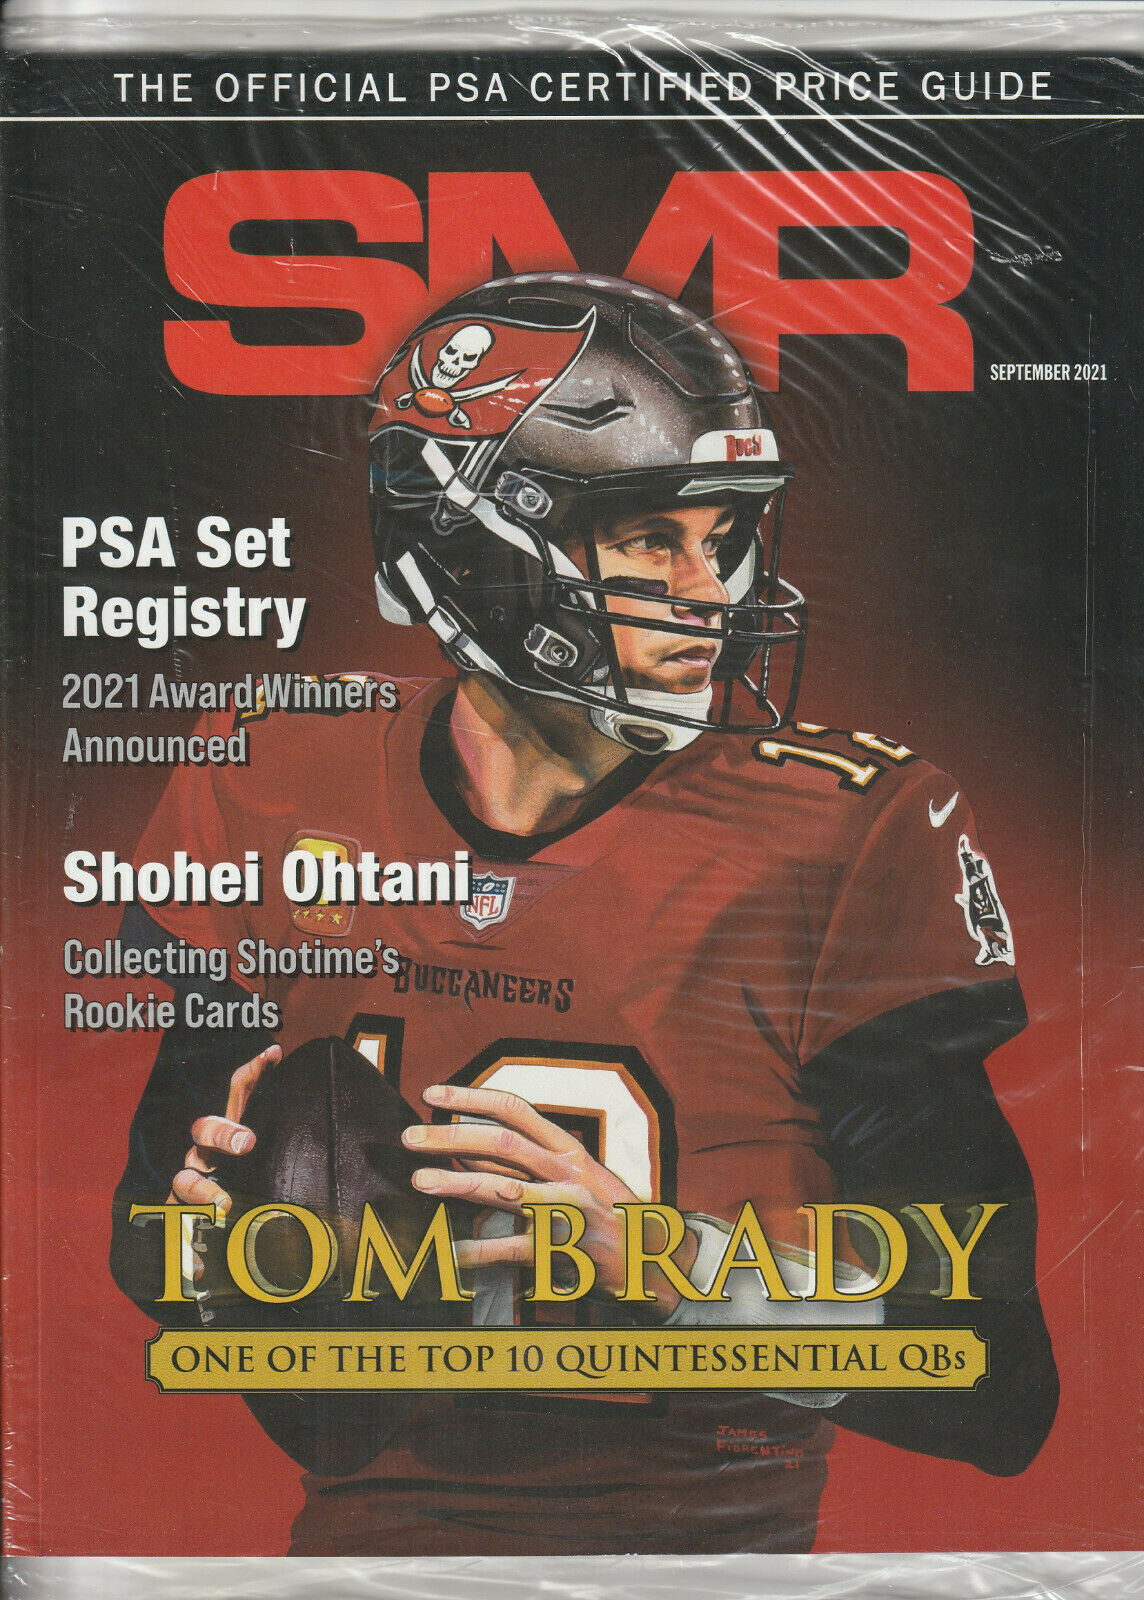 Smr Official Psa Certified Price Guide Sept 2021 Tom Brady Cover New